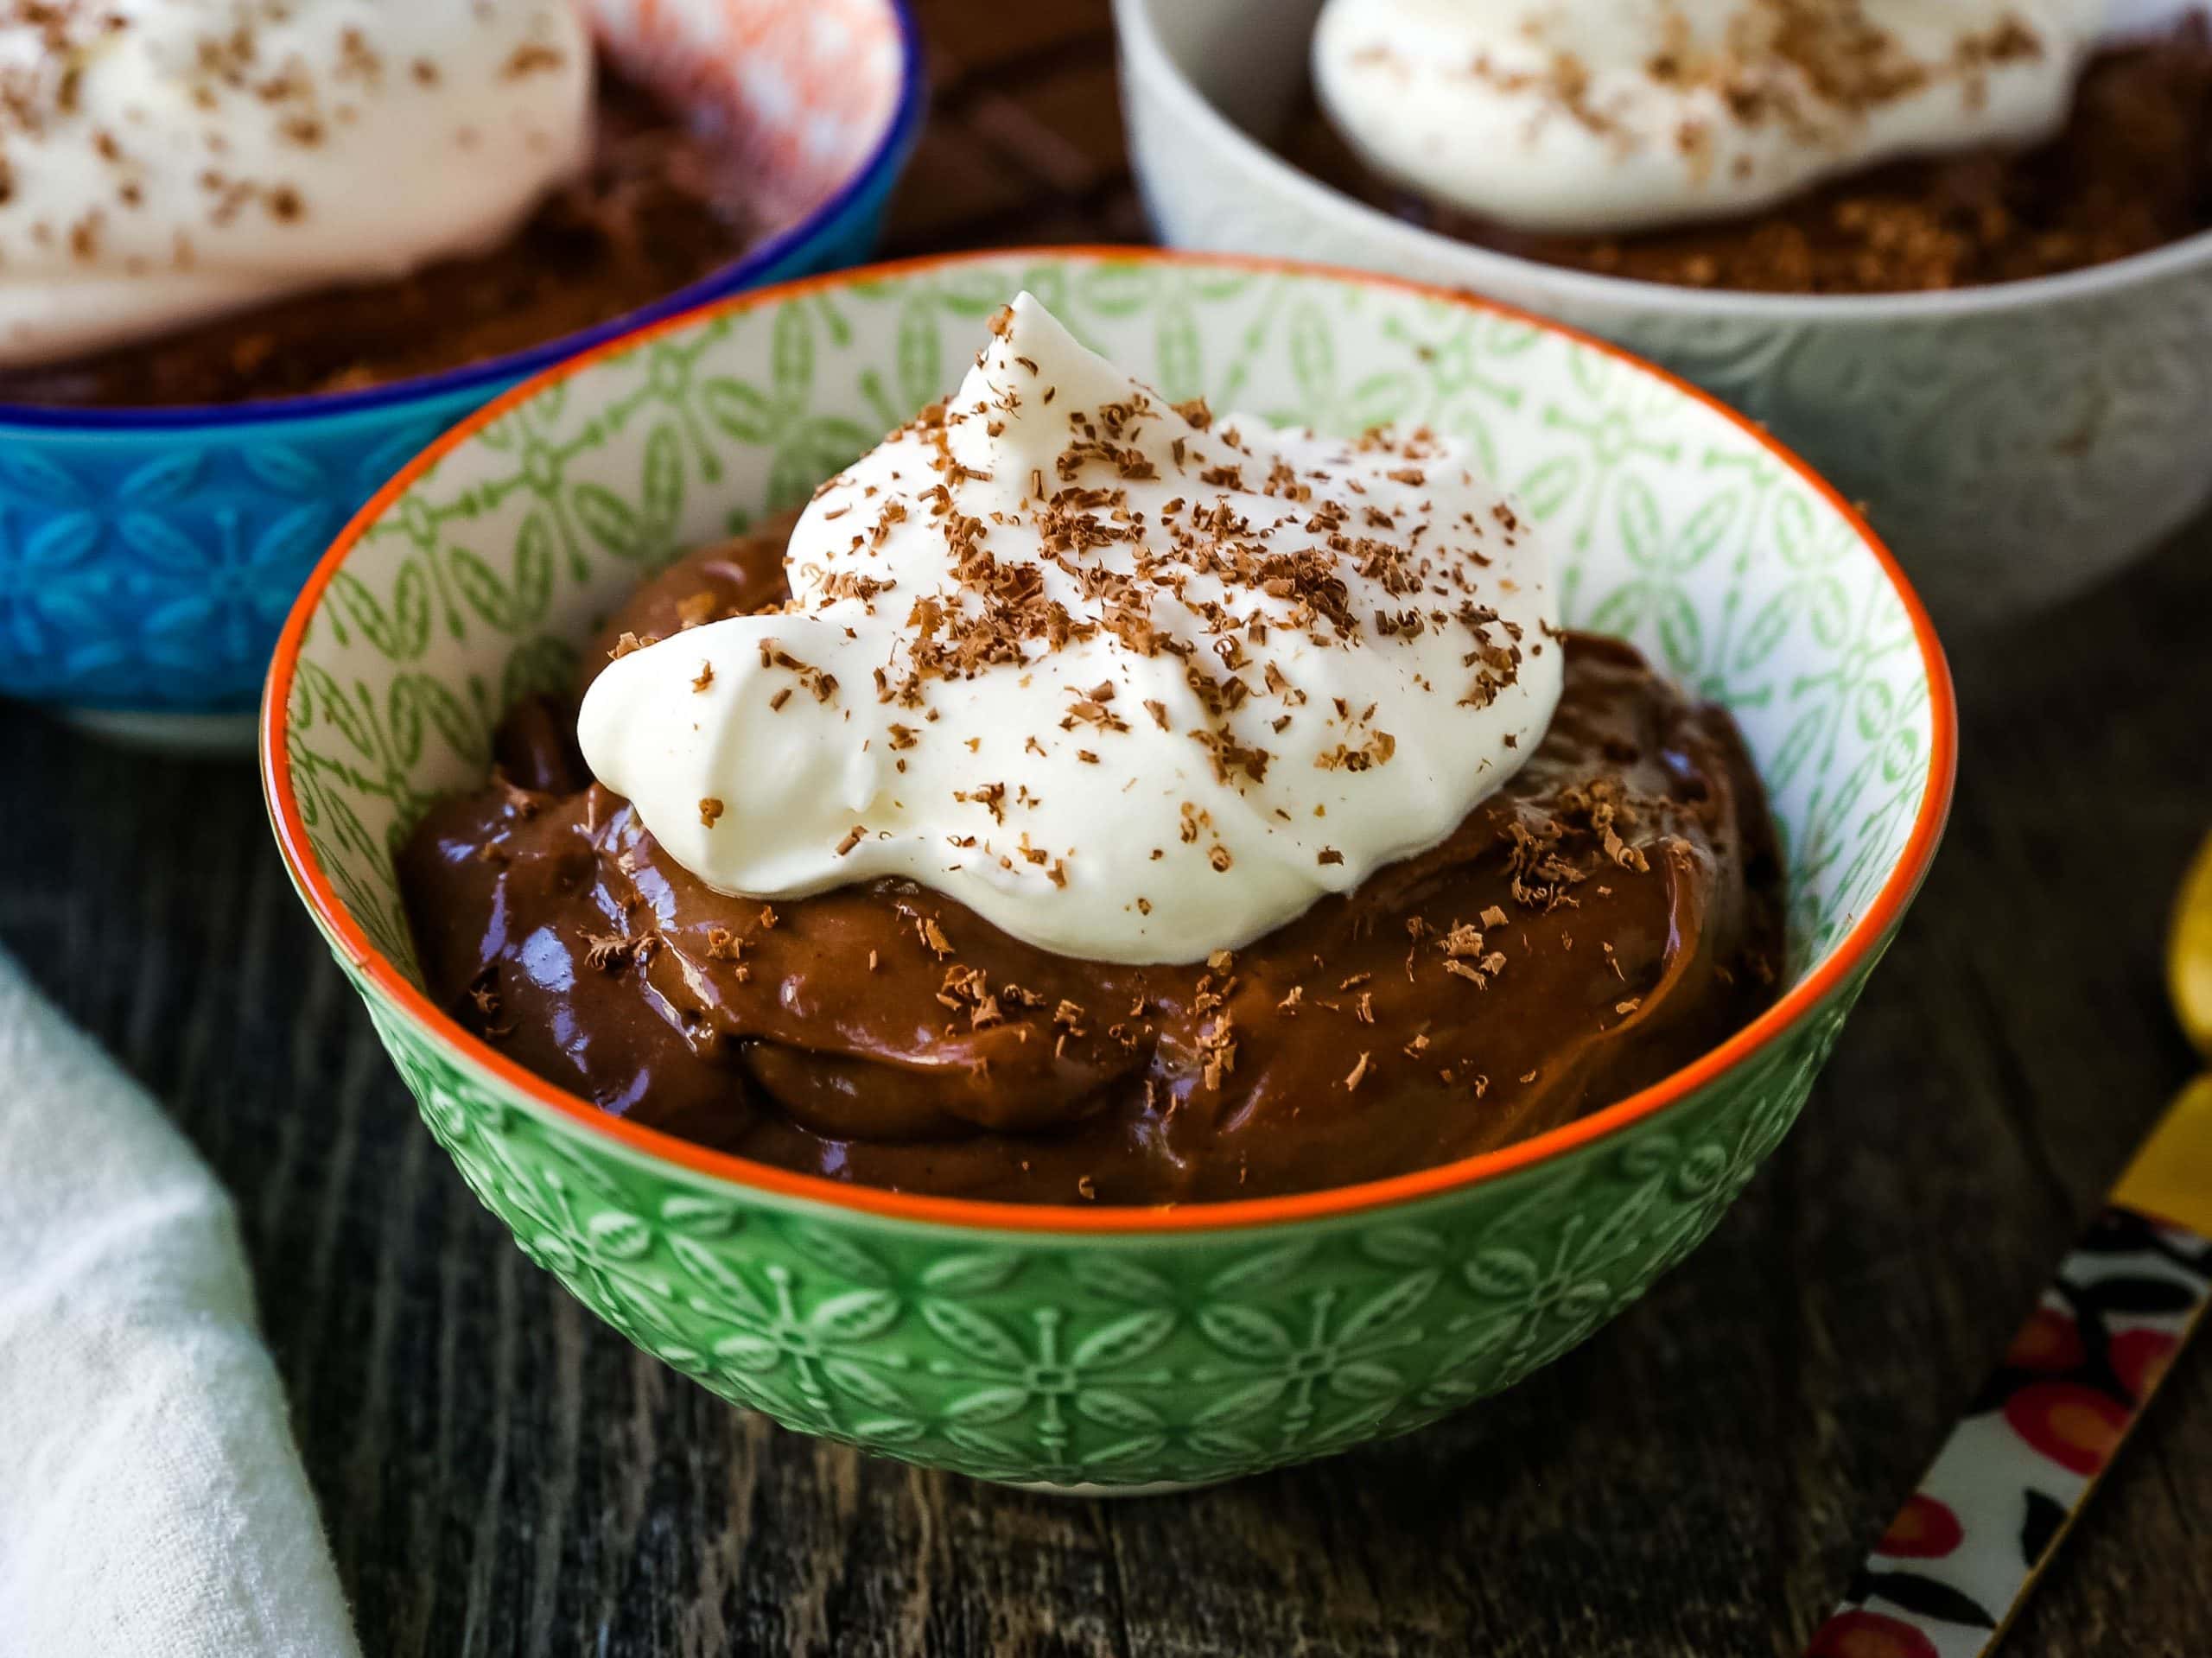 Chocolate Pudding Rich, decadent homemade chocolate pudding made with only 5 simple ingredients. The best chocolate pudding recipe! www.modernhoney.com #chocolate #chocolatepudding #pudding